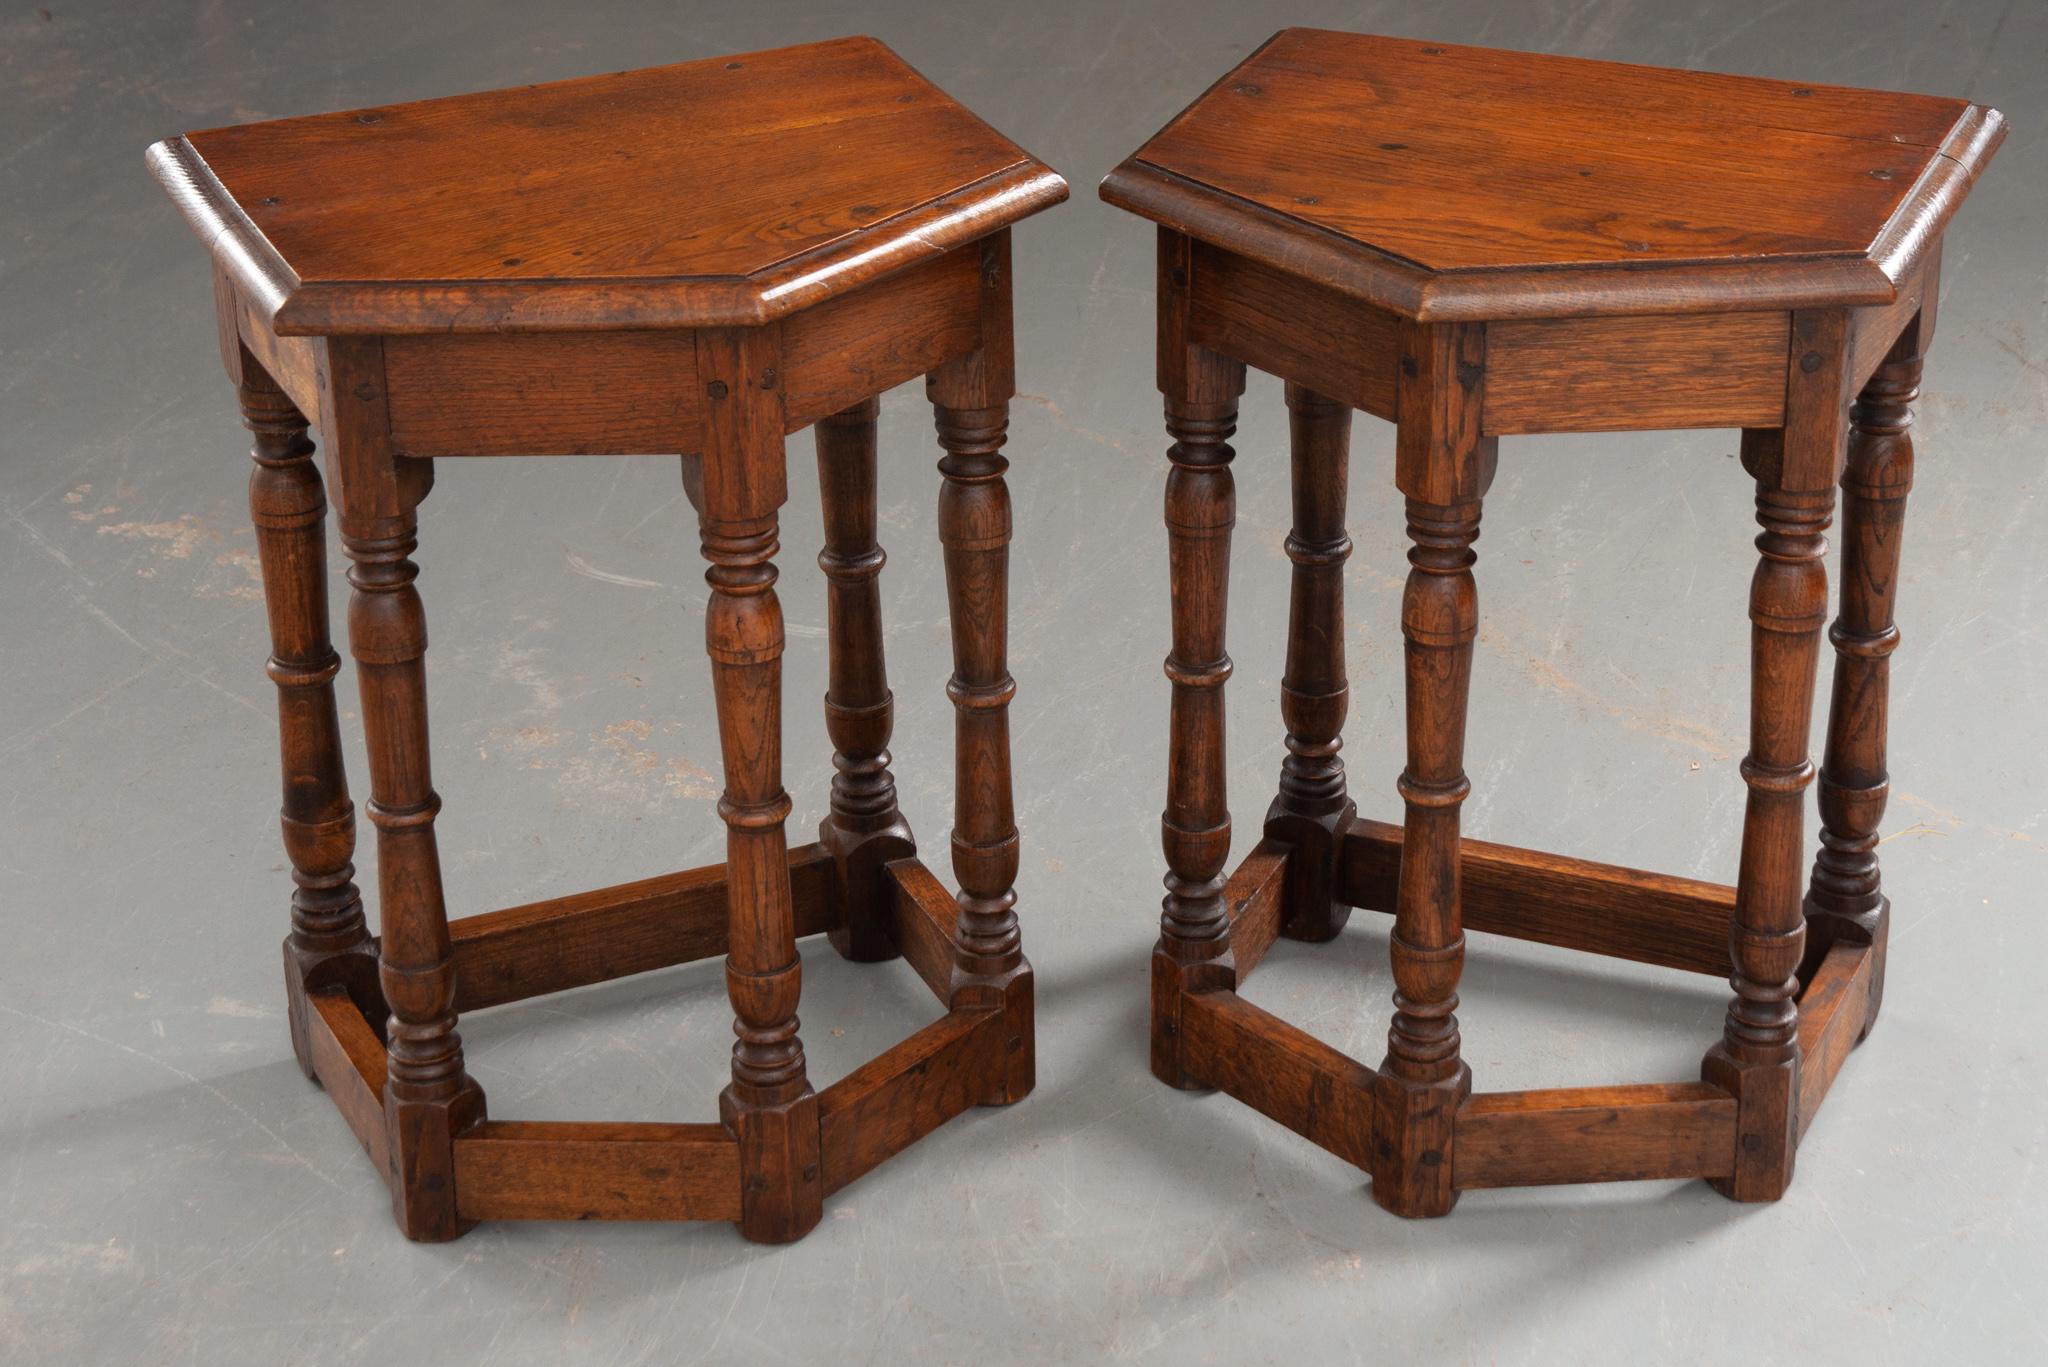 A pair of remarkable oak stools from England circa 1870. The irregular shaped pentagon top sits upon a plain apron and five symmetrical tuned legs, secured at the bottom by a stretcher that matches the unconventional top. These are beautifully hand